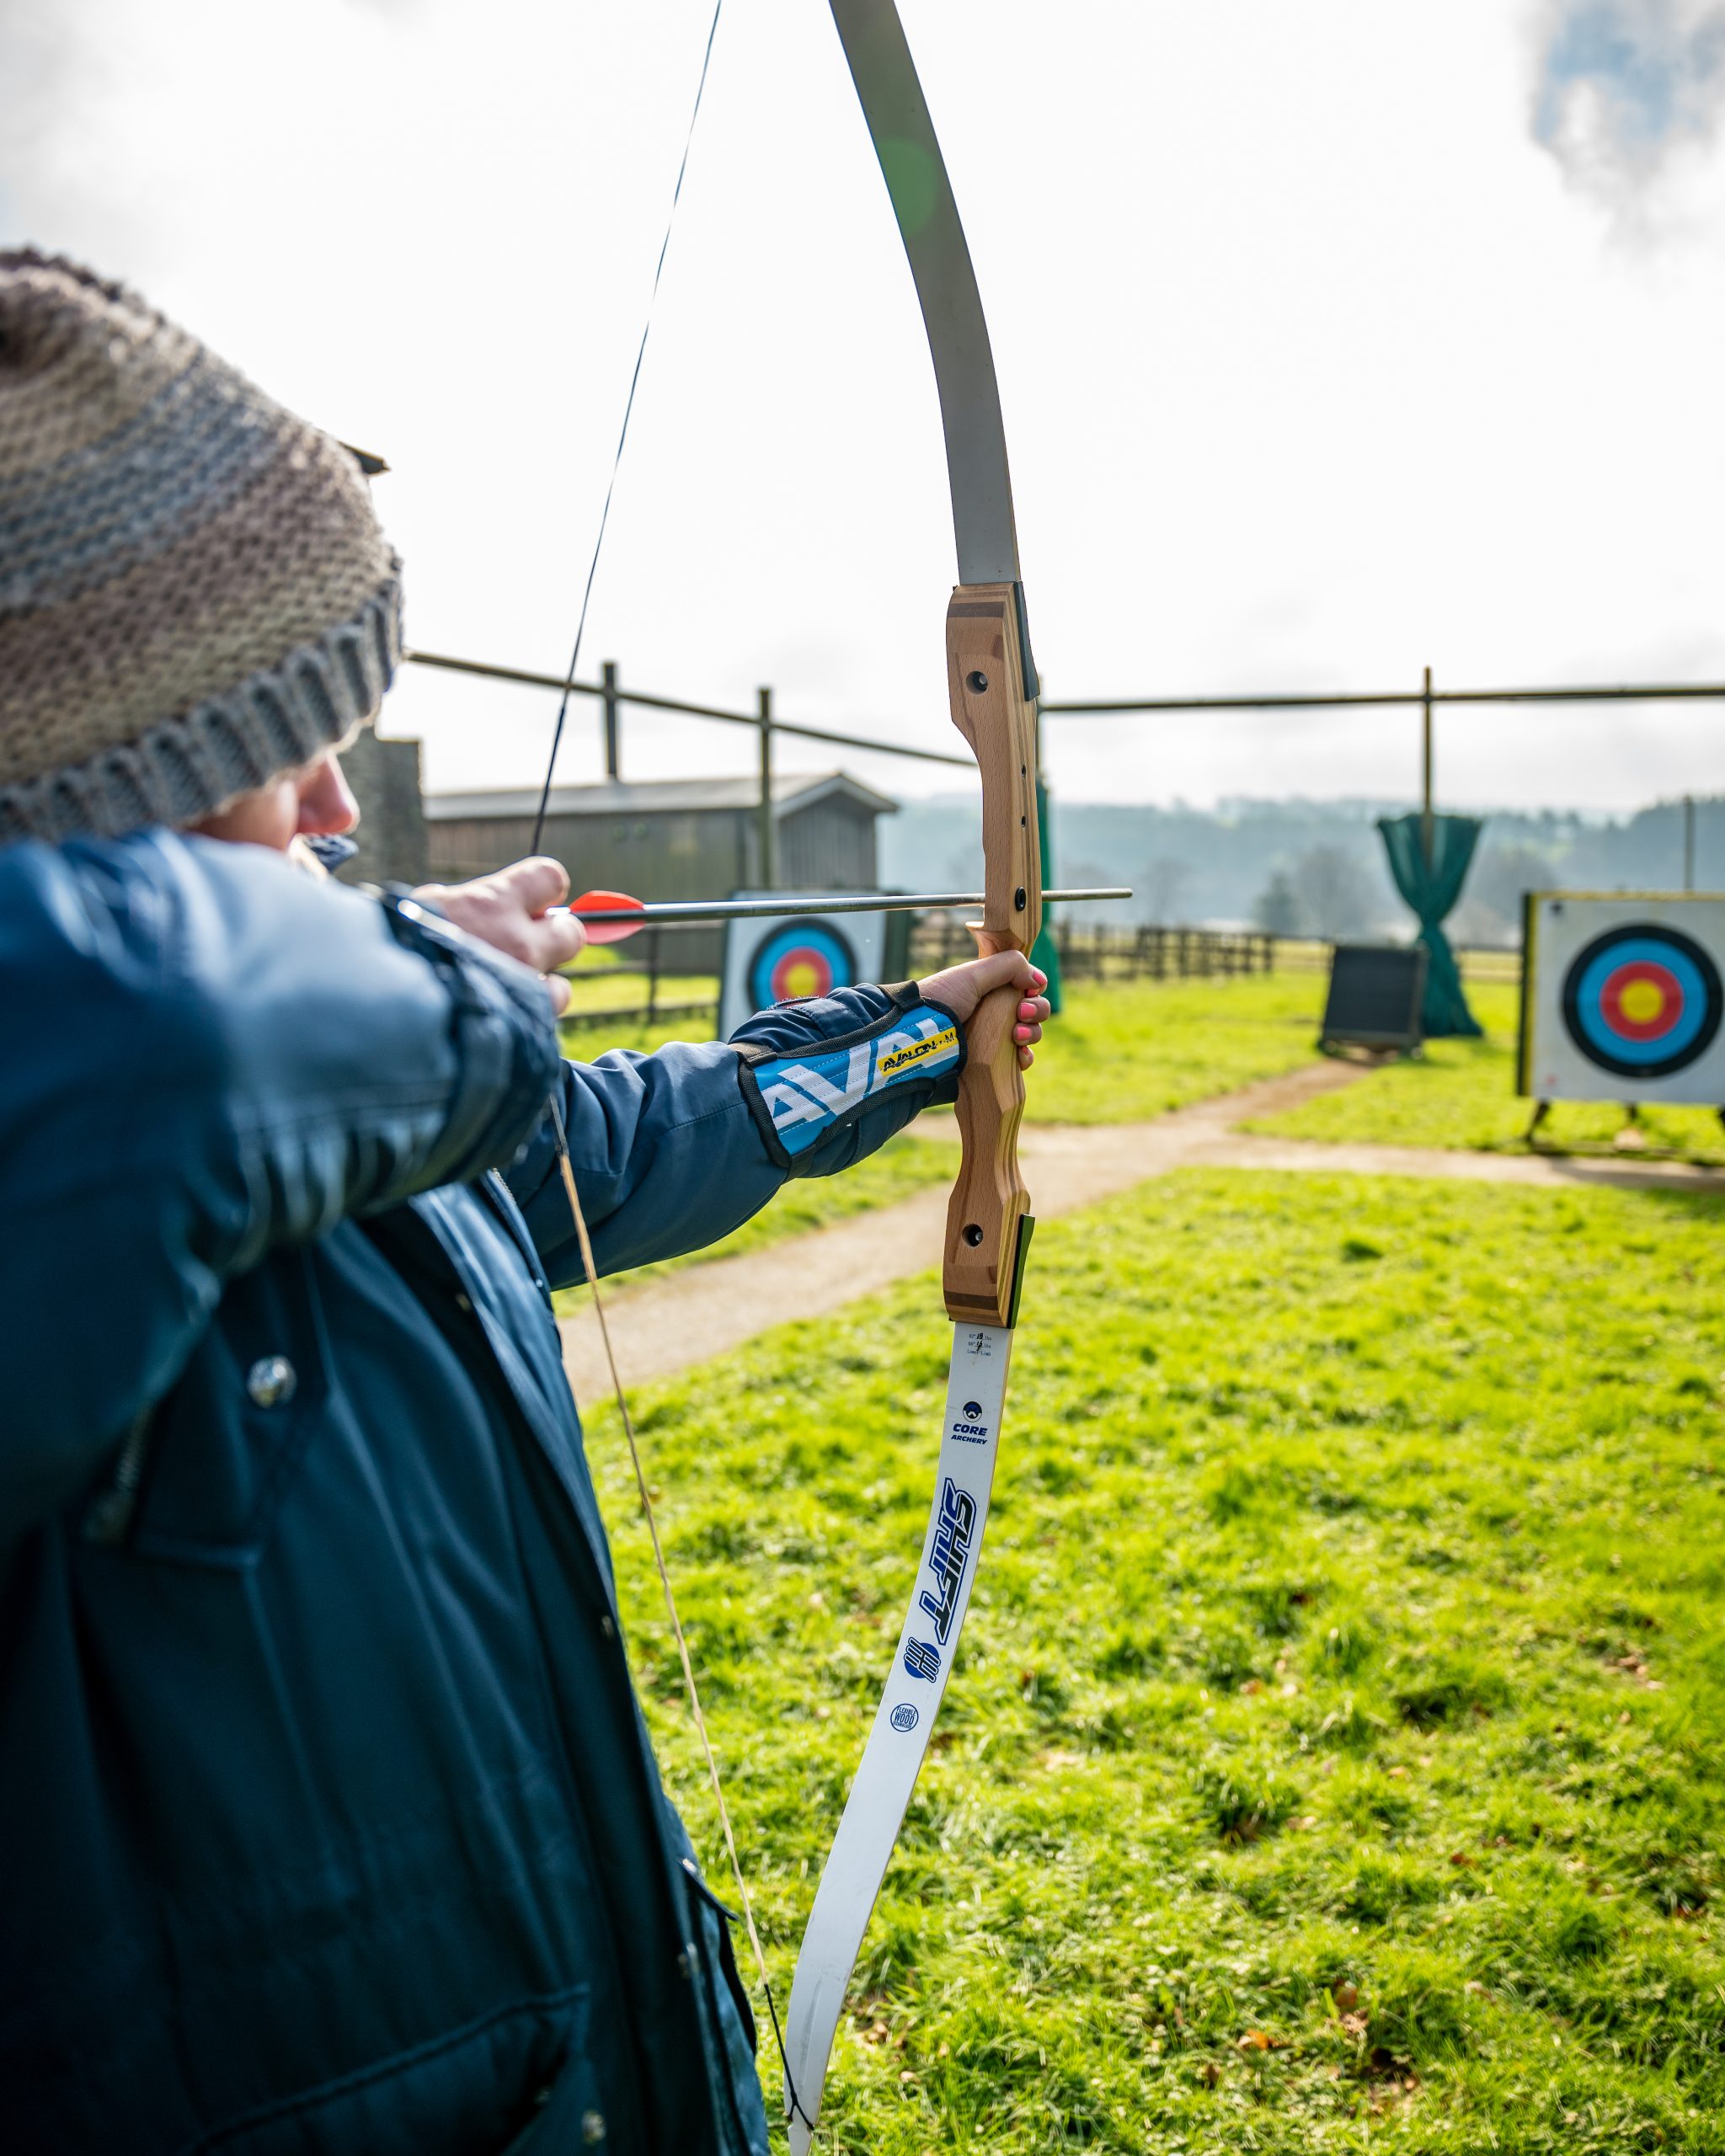 A guest wearing a coat and hat is holding a bow and arrow, with the bowstring drawn back ready to fire and the camera is facing down the line to show where they are aiming: the target.